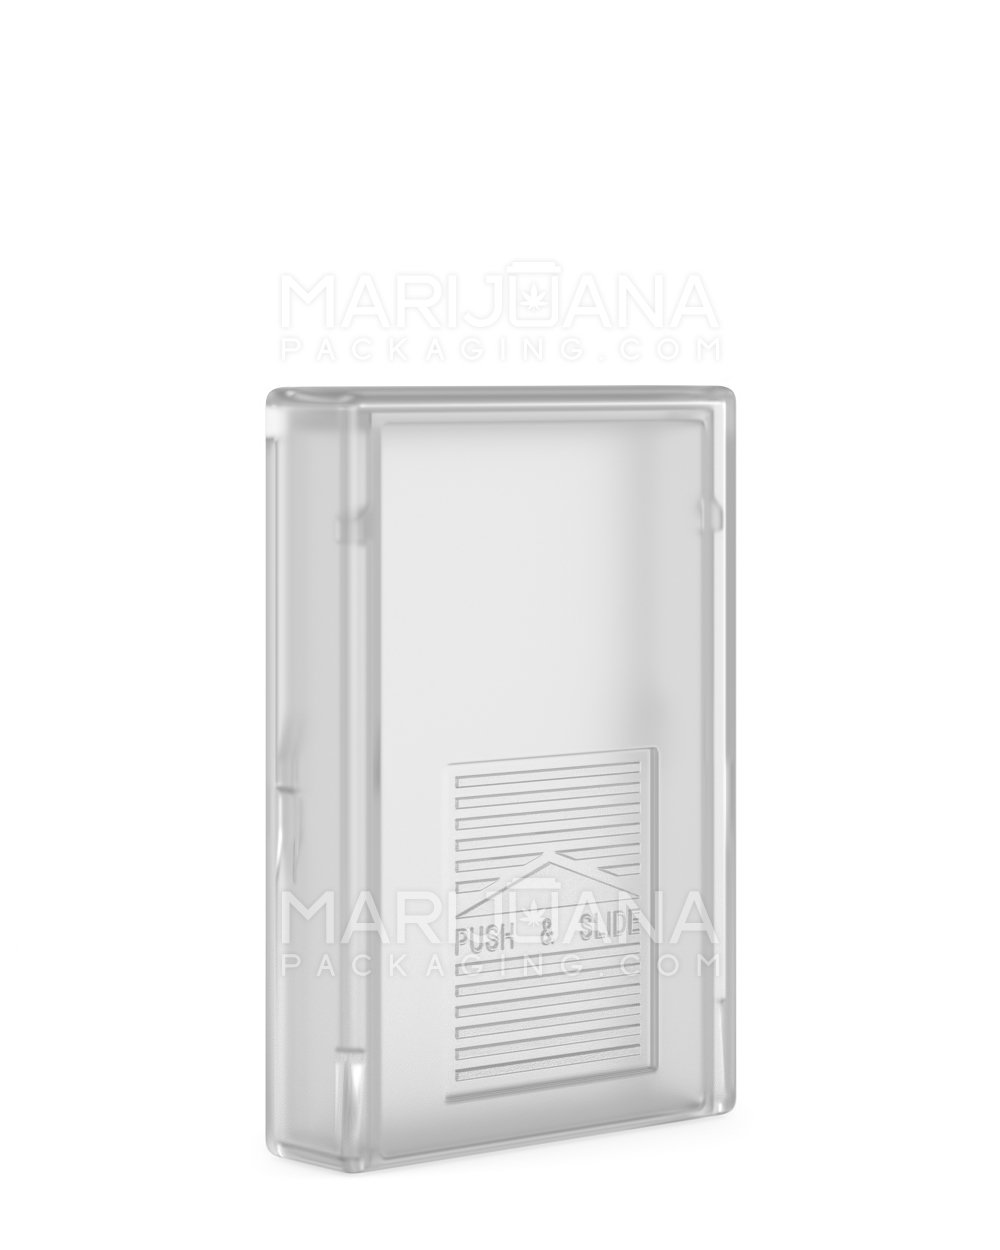 Child Resistant Push & Slide Shatter Box Concentrate Container | 61mm x 42mm - Clear Plastic | Sample - 1